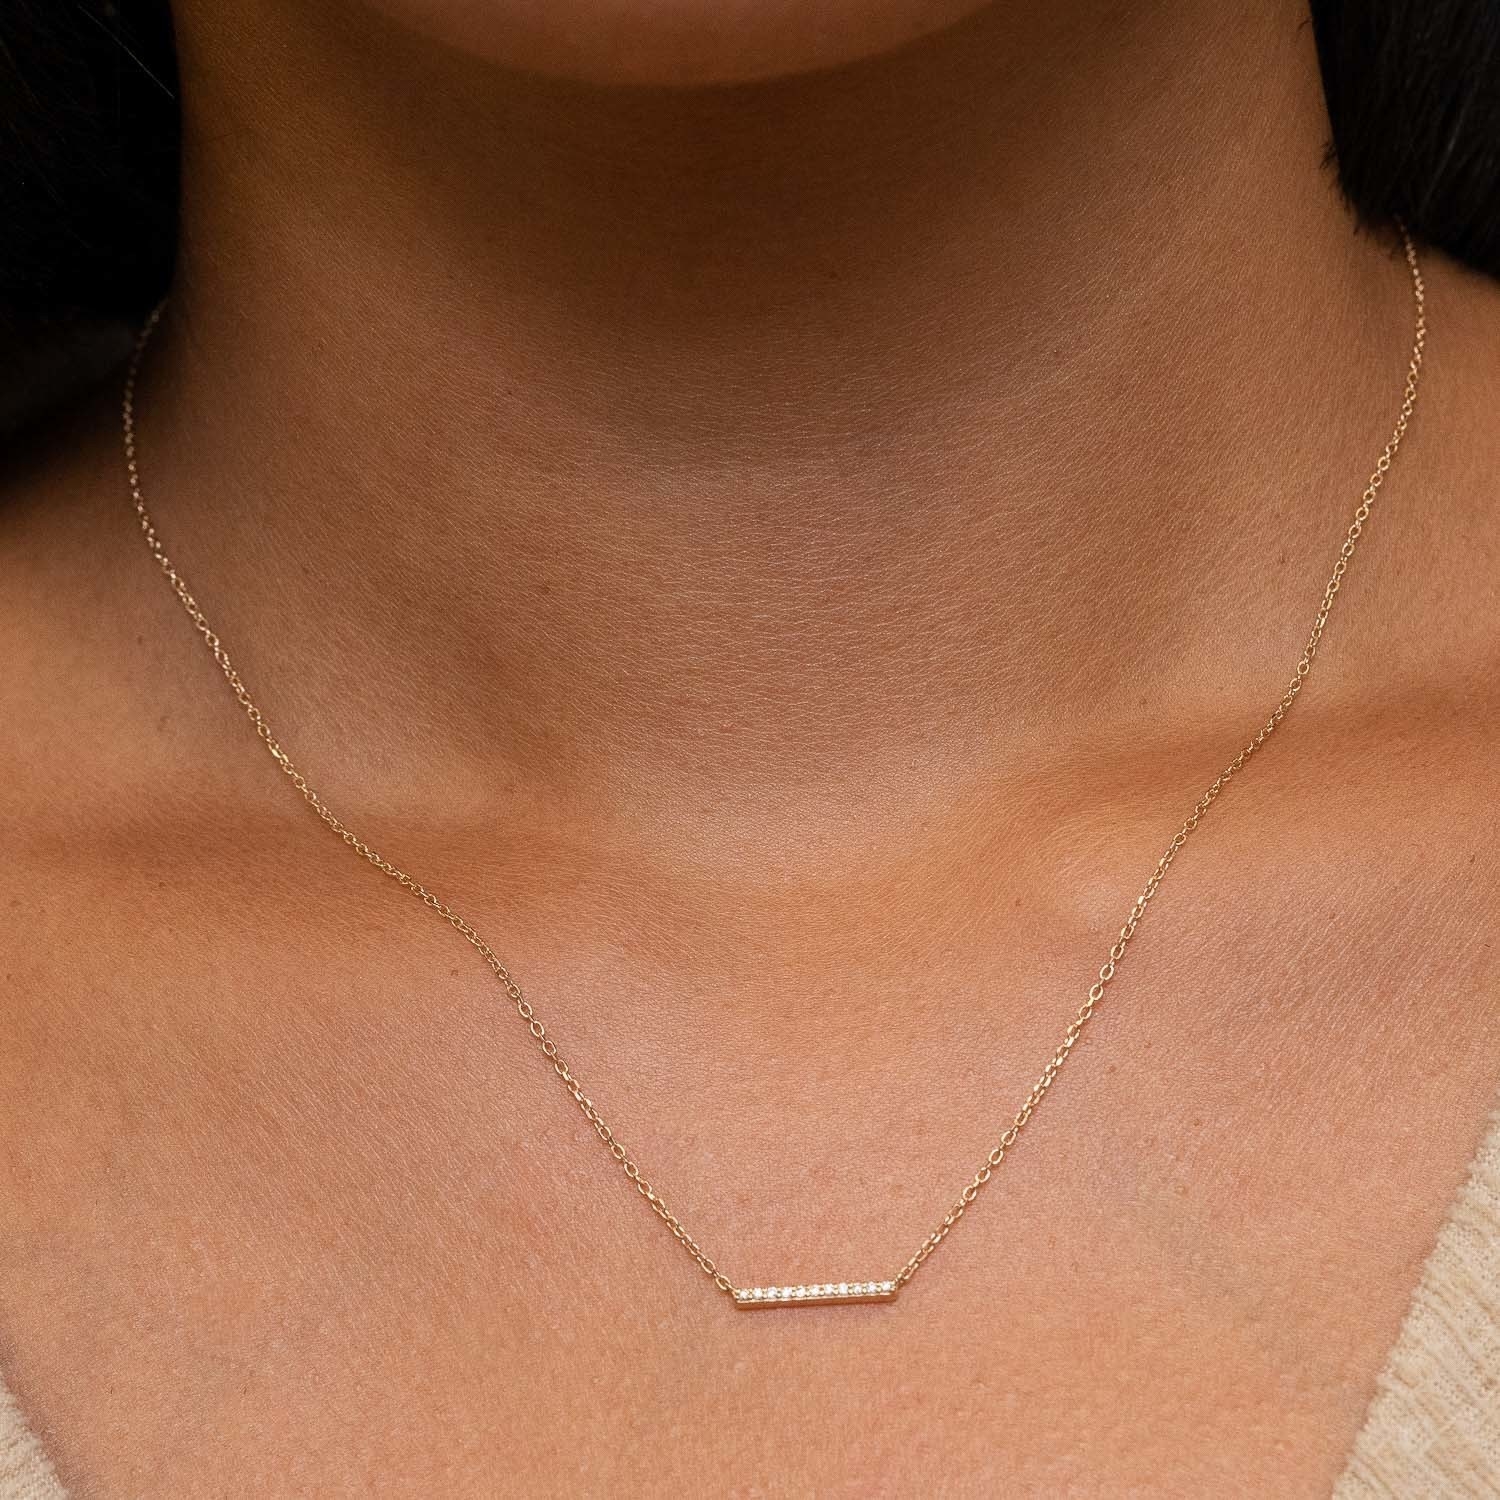 A model wearing the yellow gold necklace with tiny diamonds